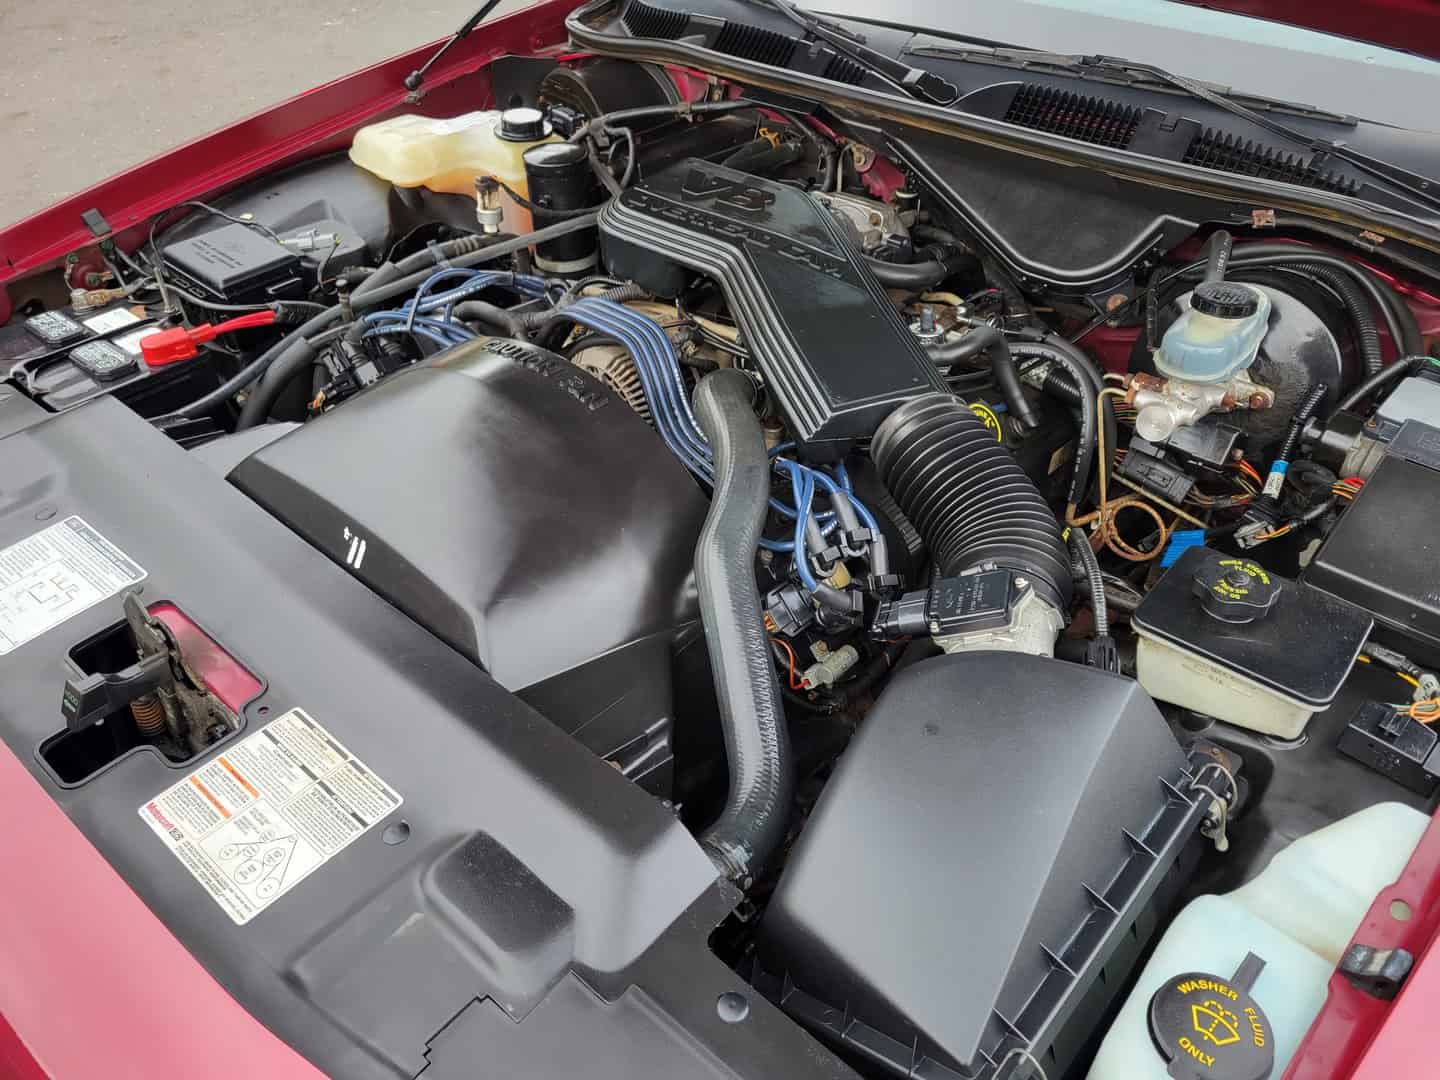 The engine compartment of a red car.